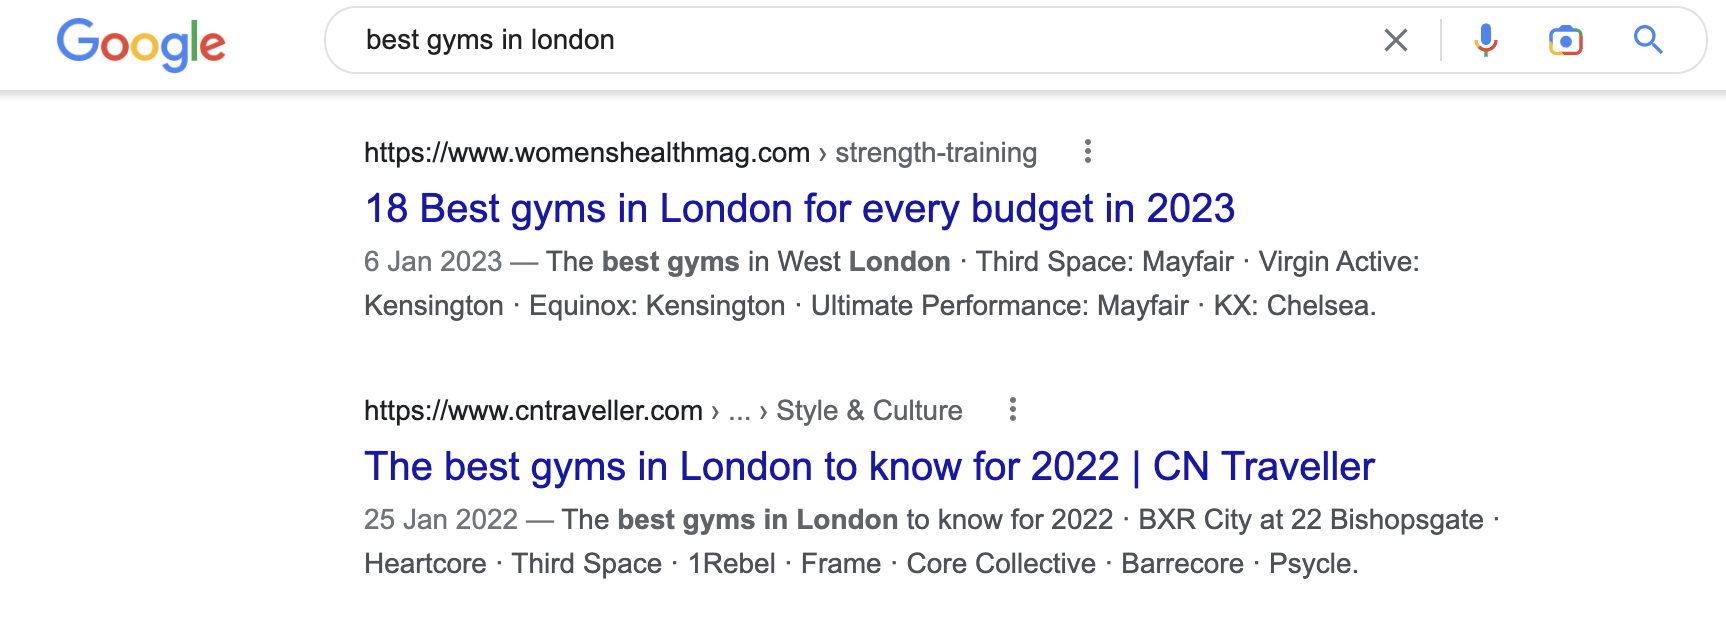 Searching for resource pages listing the best gyms in London